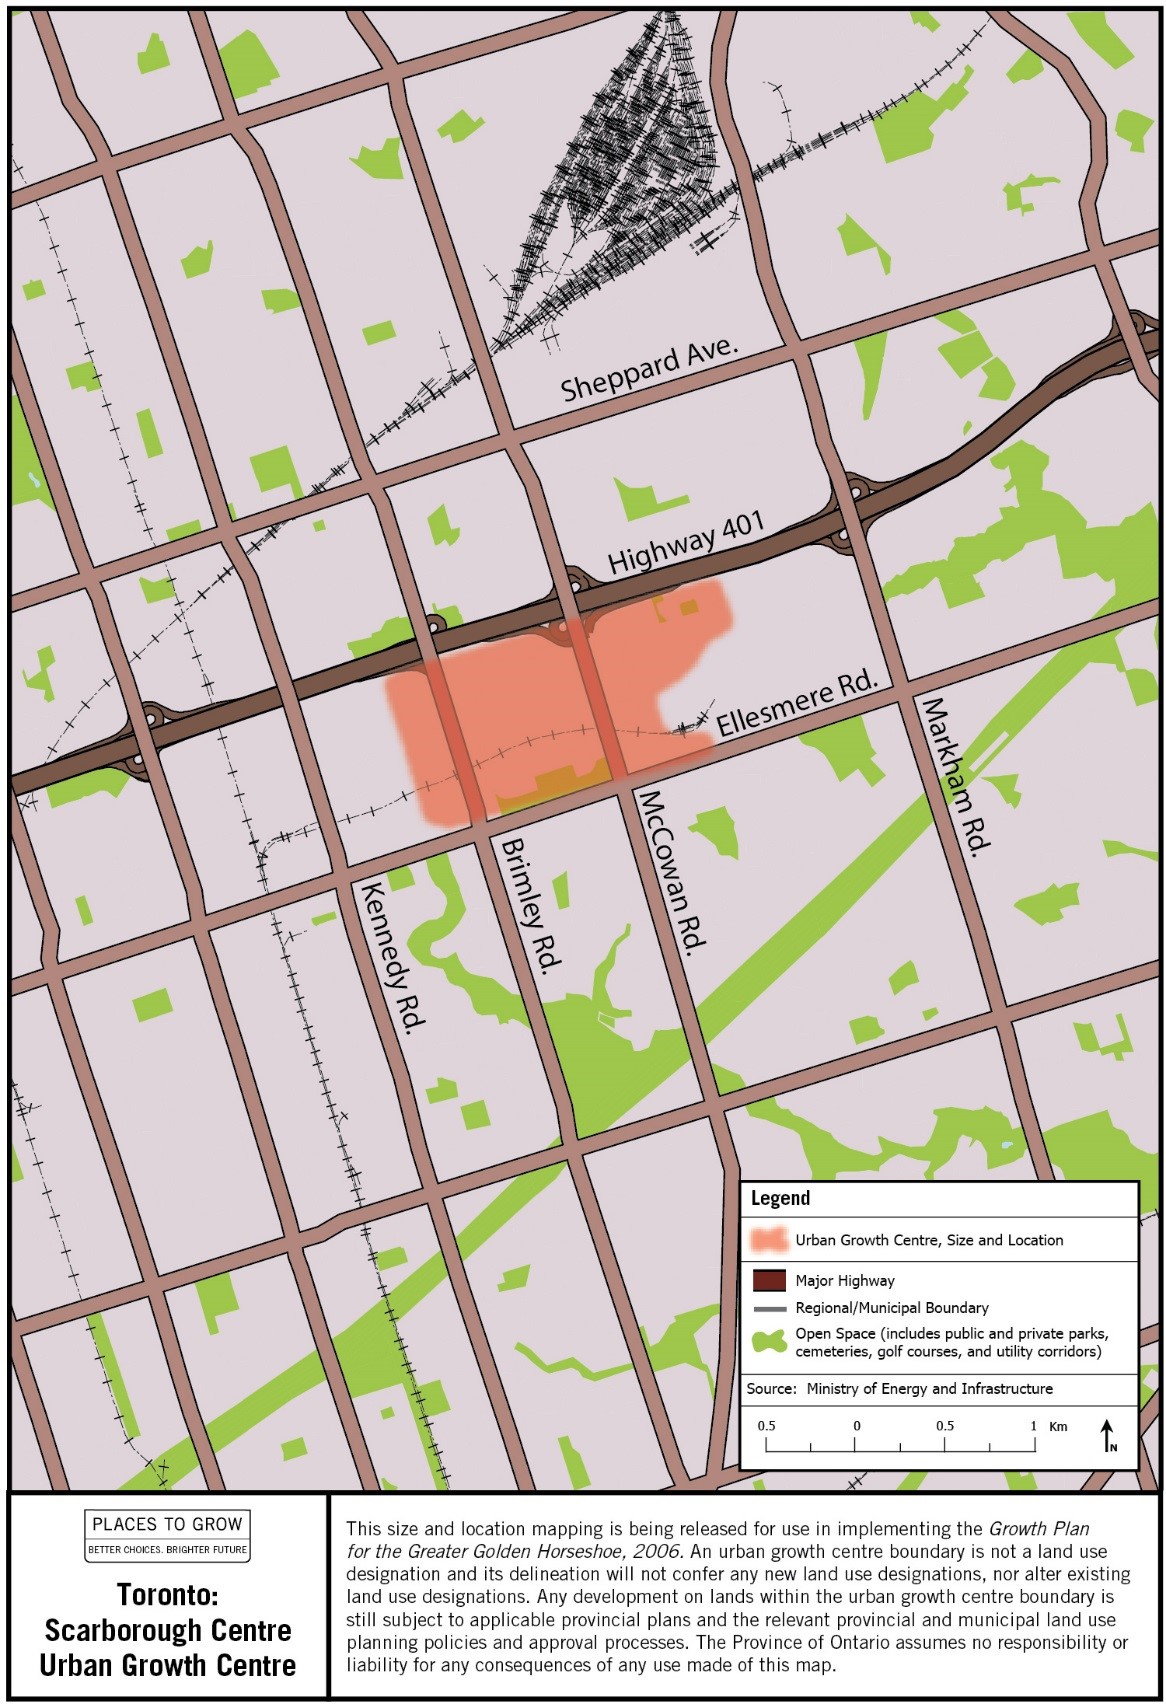 Map of the approximate size and location of the Toronto: Scarborough Centre Urban Growth Centre in the vicinity of McCowan and Ellesmere Roads.